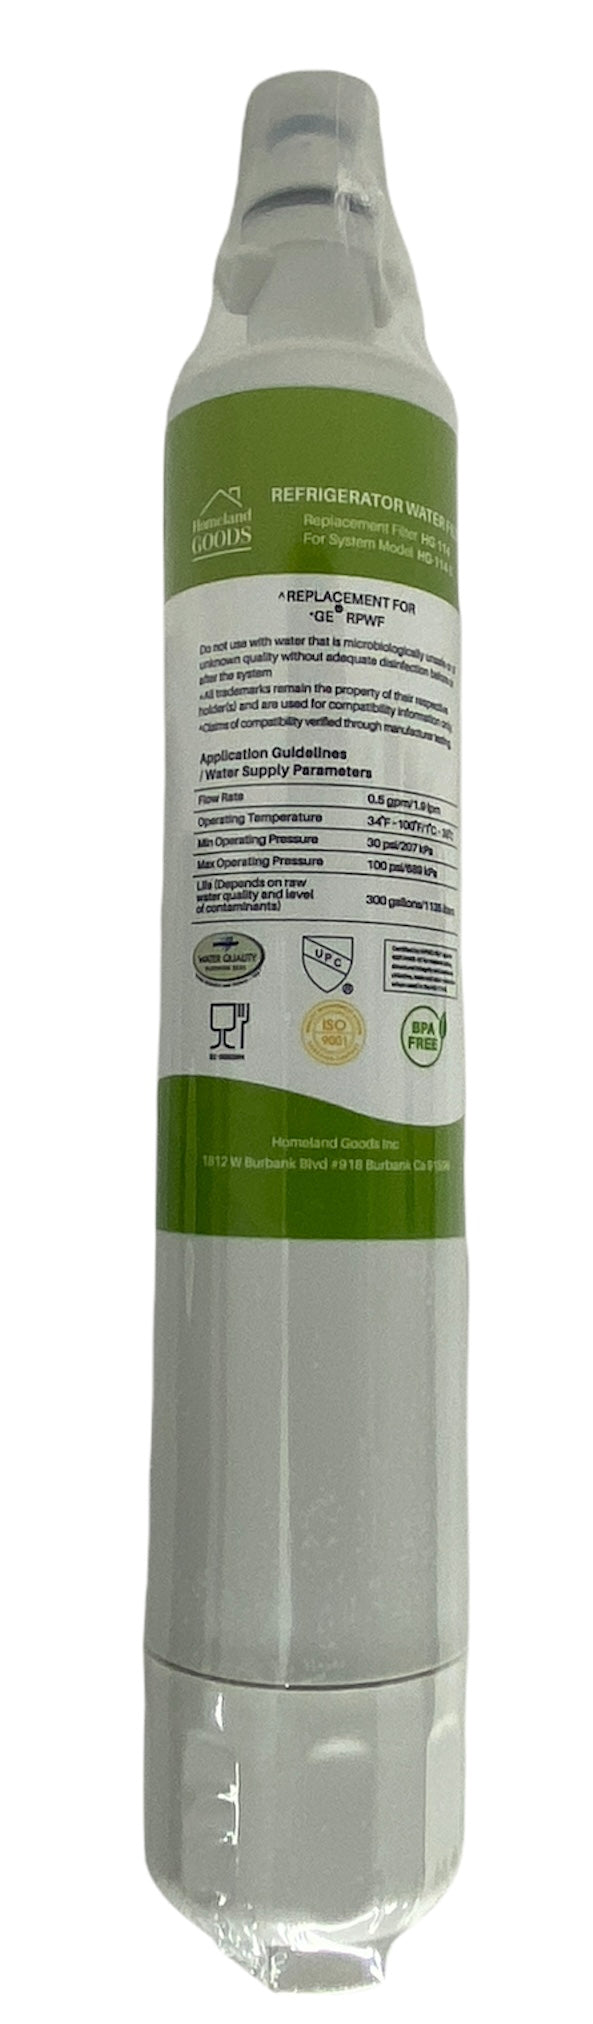 RWF3600A Refrigerator Water Filter IAPMO Certified Replacement for GE RPWF (NOT RPWFE), RWF1063, RWF3600A, WSG-4, DWF-36, R-3600, MPF15350, OPFG3-RF300, BCF77 Refrigerator Water Filter